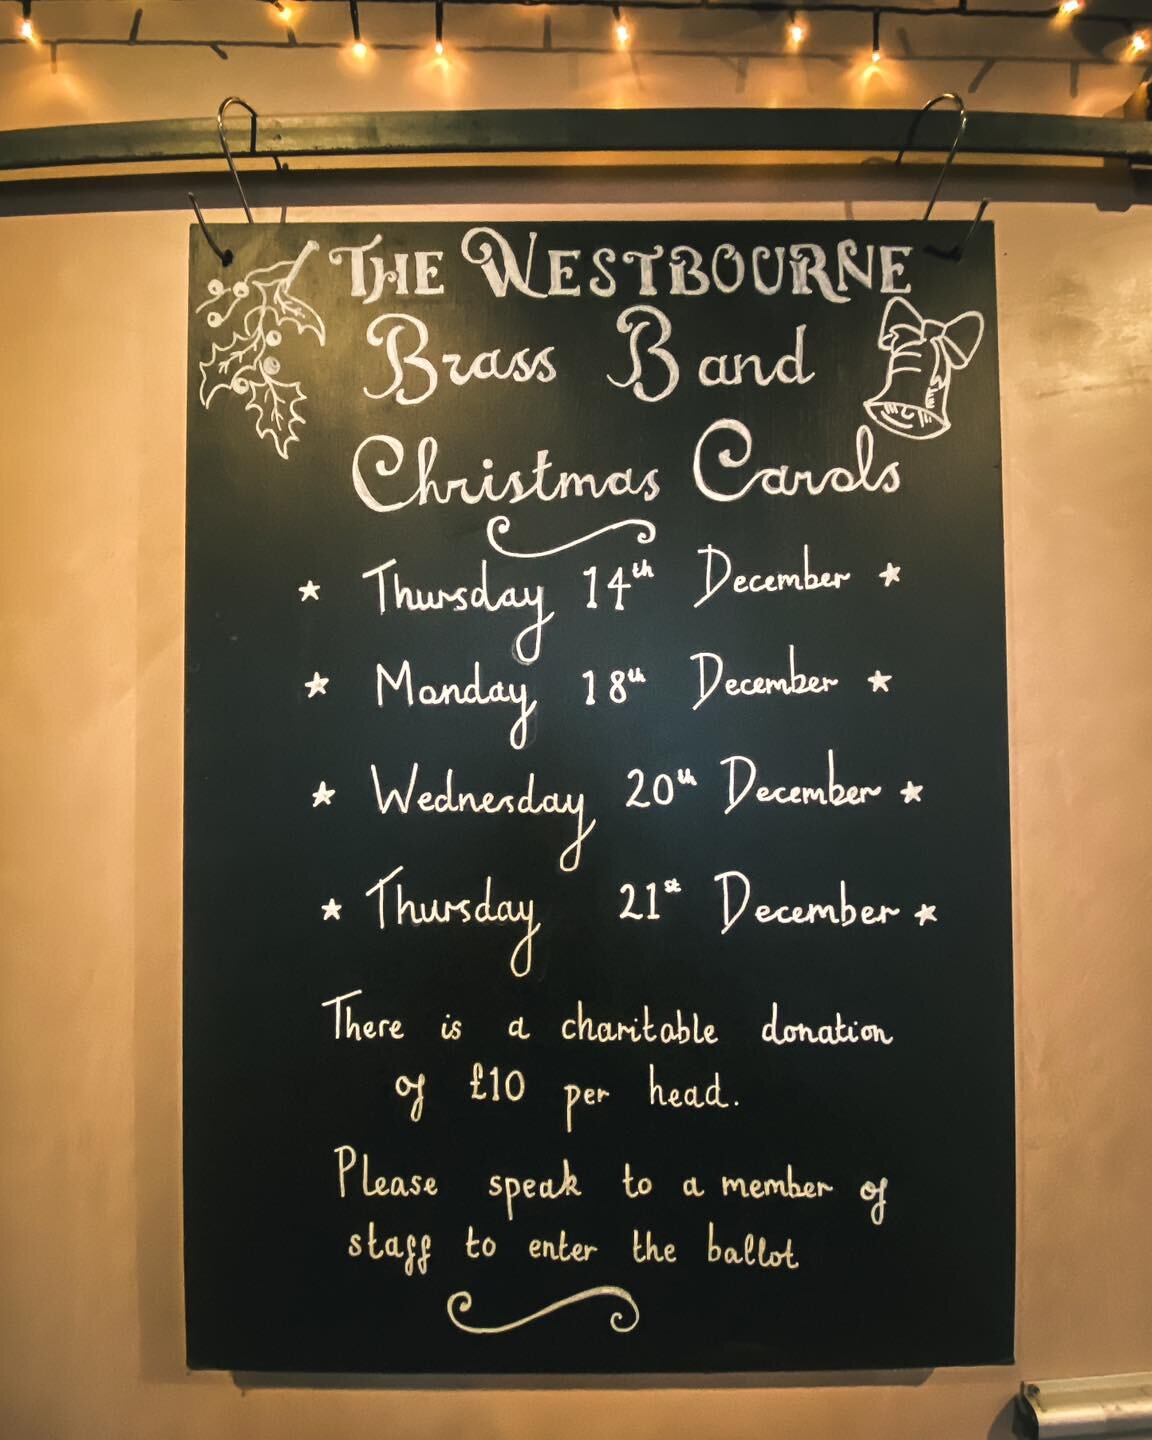 It&rsquo;s that time of year again! 

The Westbourne Brass Band Christmas Carols will be back this December for 4 dates. 

Thursday 14th December
Monday 18th December
Wednesday 20th December 
Thursday 21st December

To enter the ballot for these plea